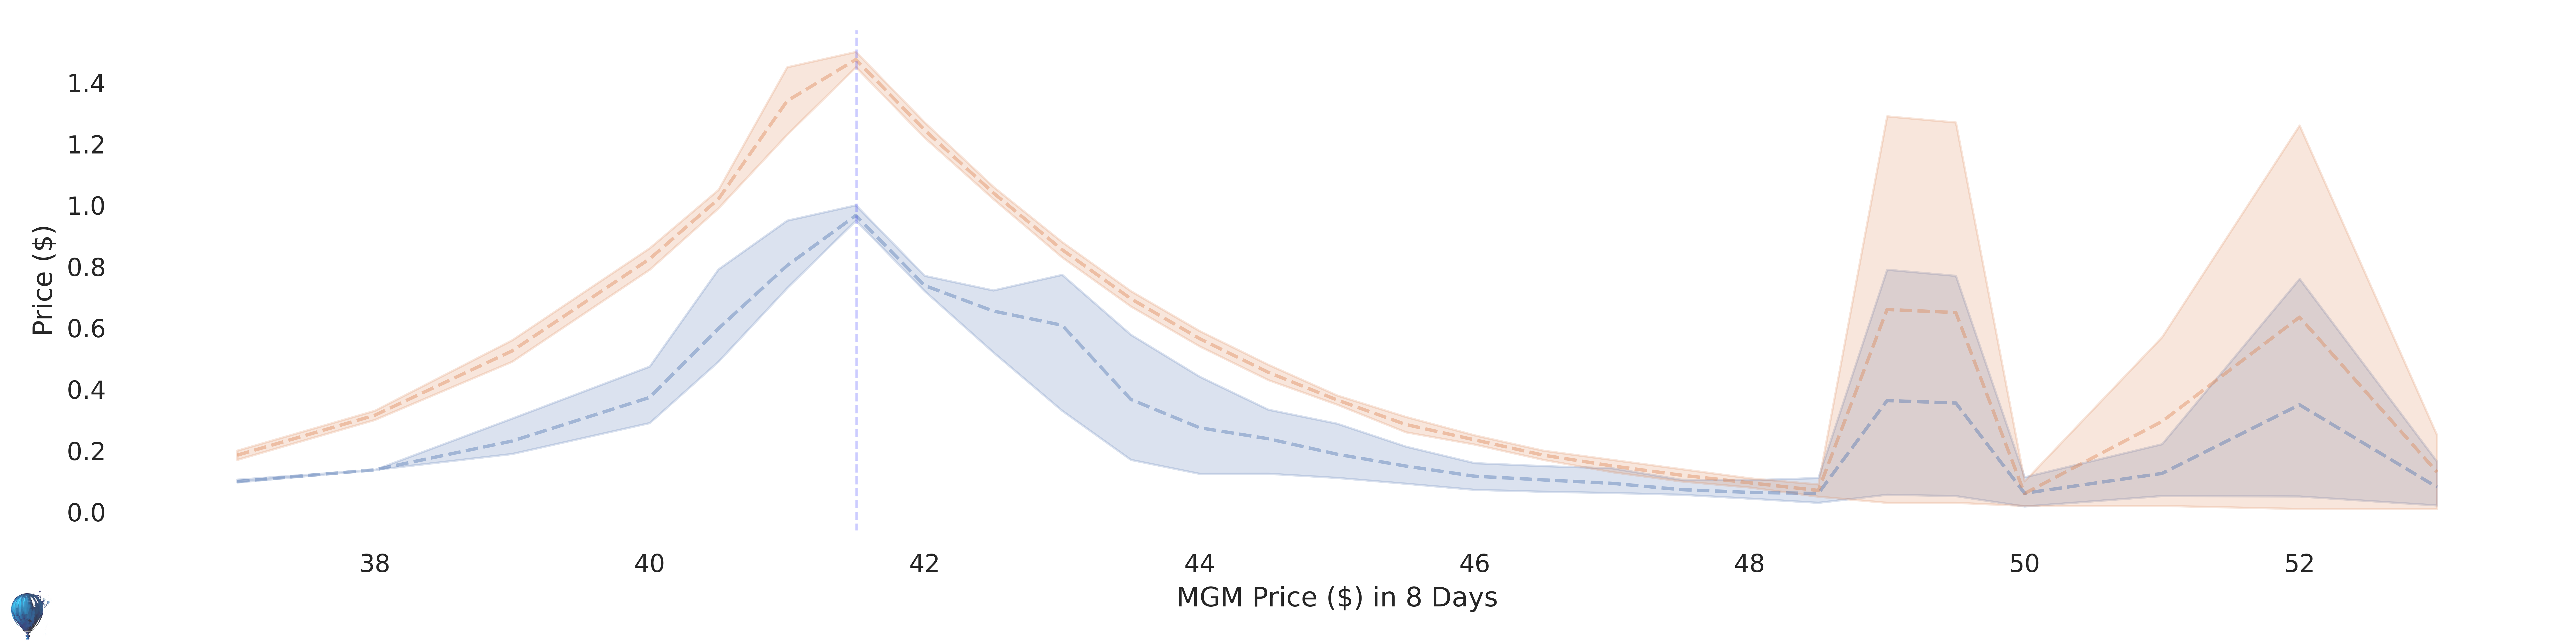 MGM current options pricing